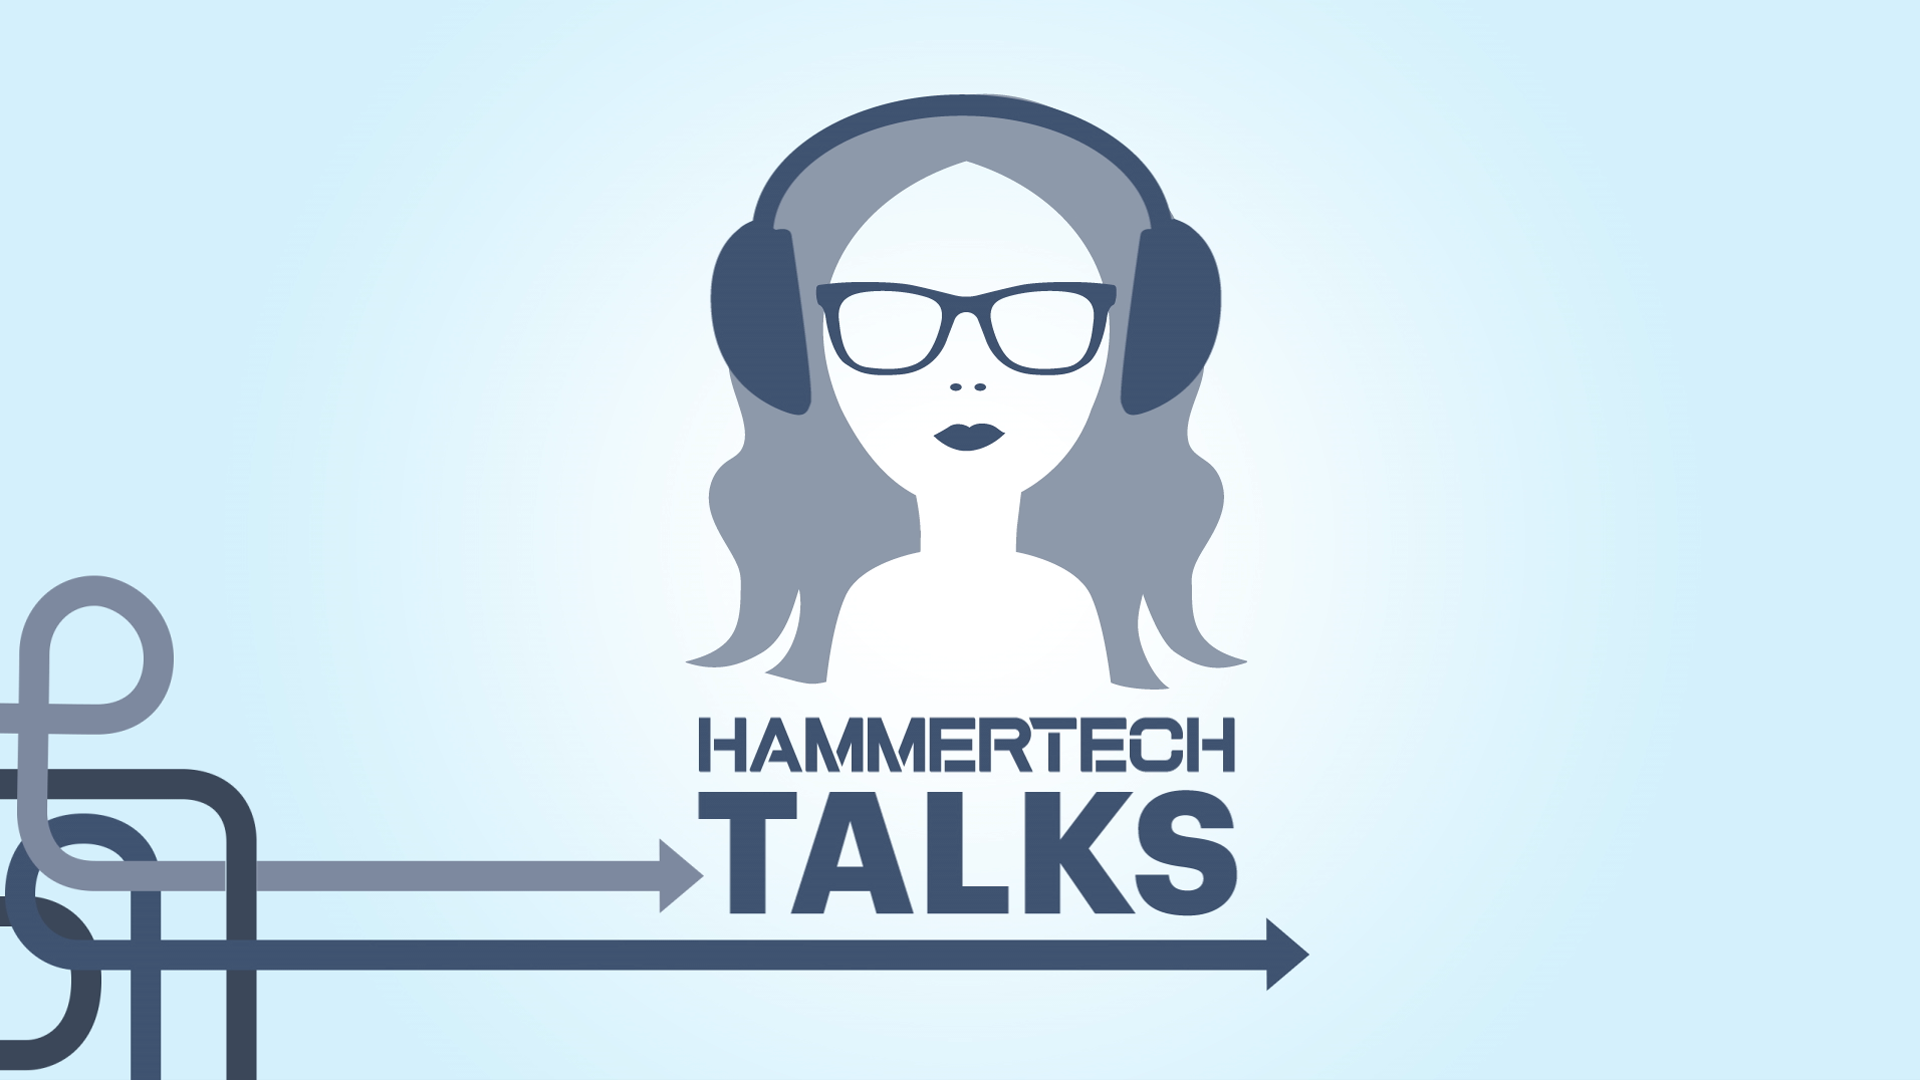 HammerTech Talks with Cal Beyer, VP of Workforce Risk and Worker Wellbeing at CSDZ